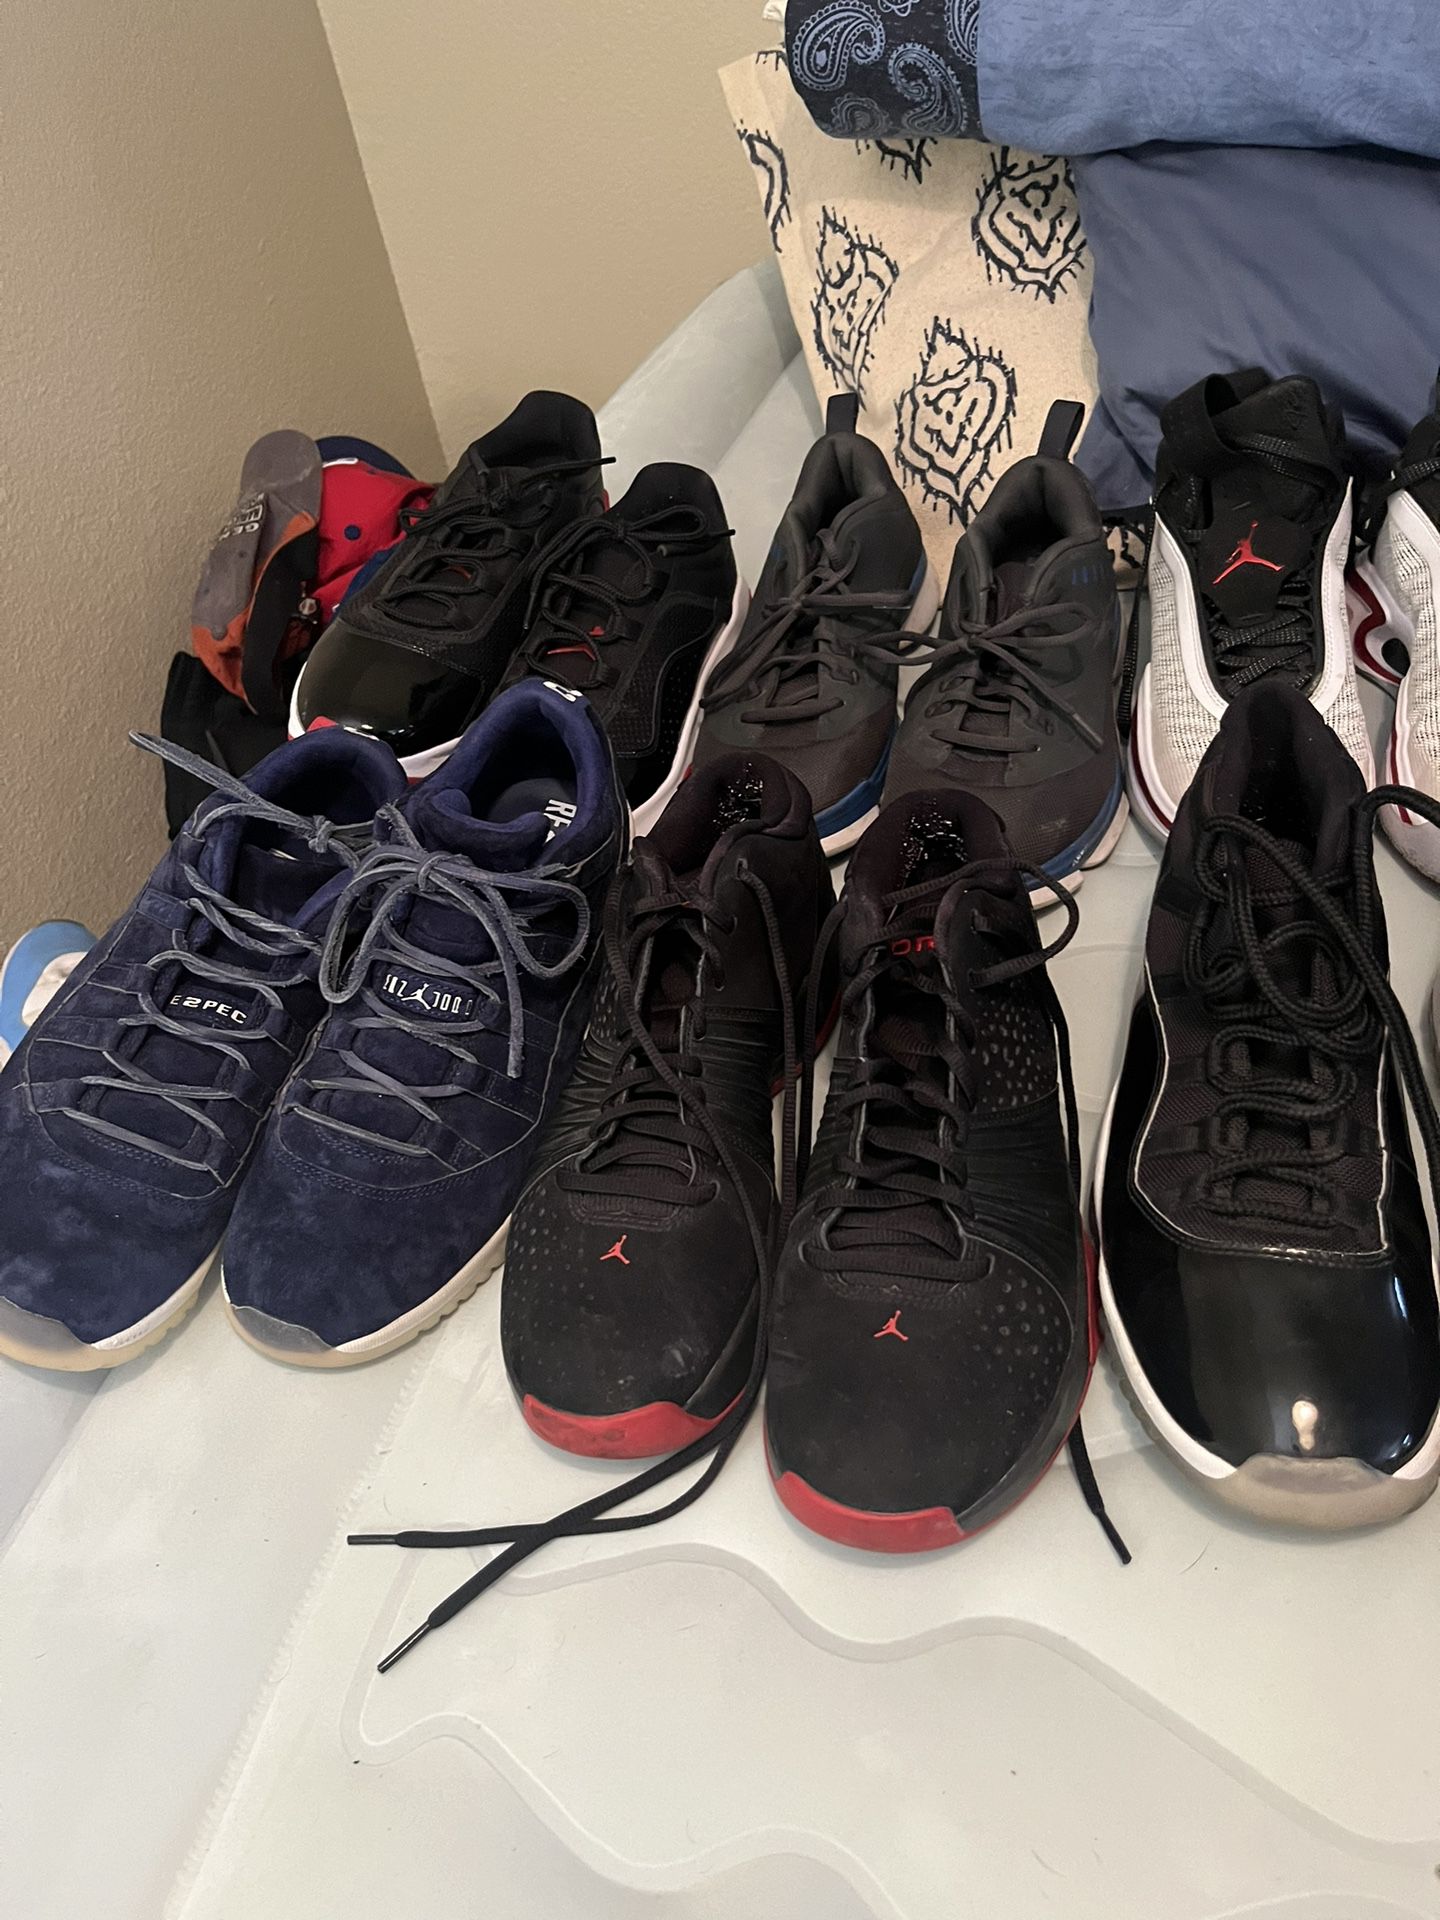 Jordan’s And Other Shoes